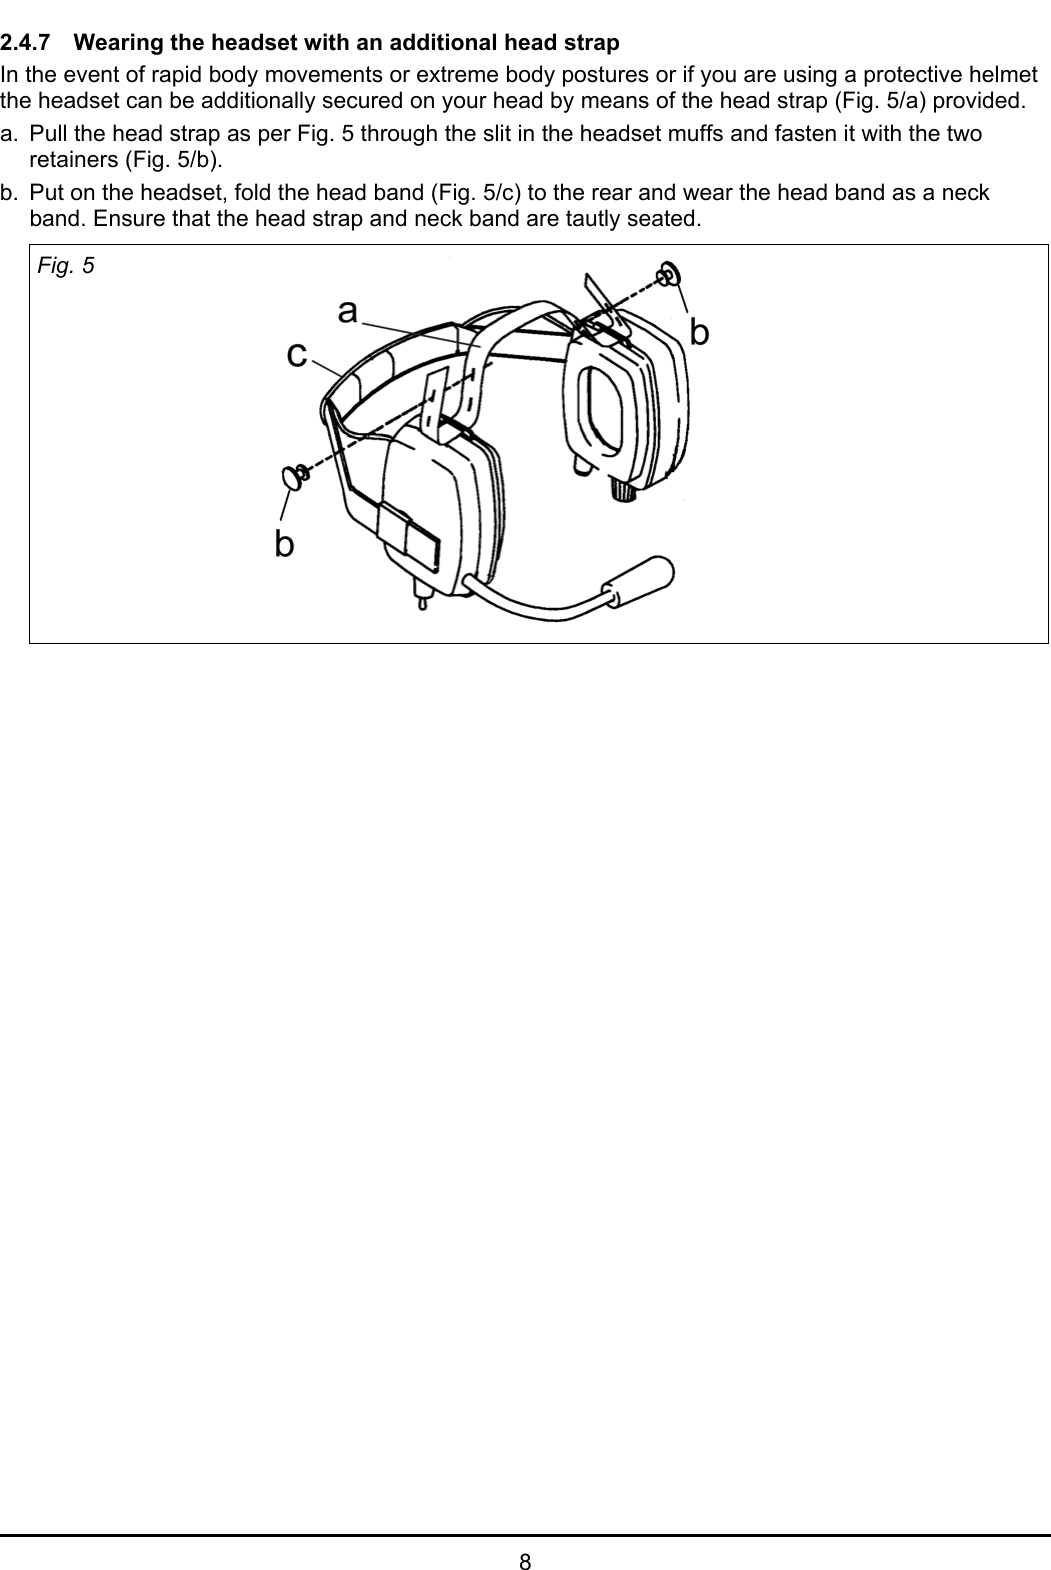 82.4.7 Wearing the headset with an additional head strapIn the event of rapid body movements or extreme body postures or if you are using a protective helmetthe headset can be additionally secured on your head by means of the head strap (Fig. 5/a) provided. a. Pull the head strap as per Fig. 5 through the slit in the headset muffs and fasten it with the tworetainers (Fig. 5/b). b. Put on the headset, fold the head band (Fig. 5/c) to the rear and wear the head band as a neckband. Ensure that the head strap and neck band are tautly seated.Fig. 5